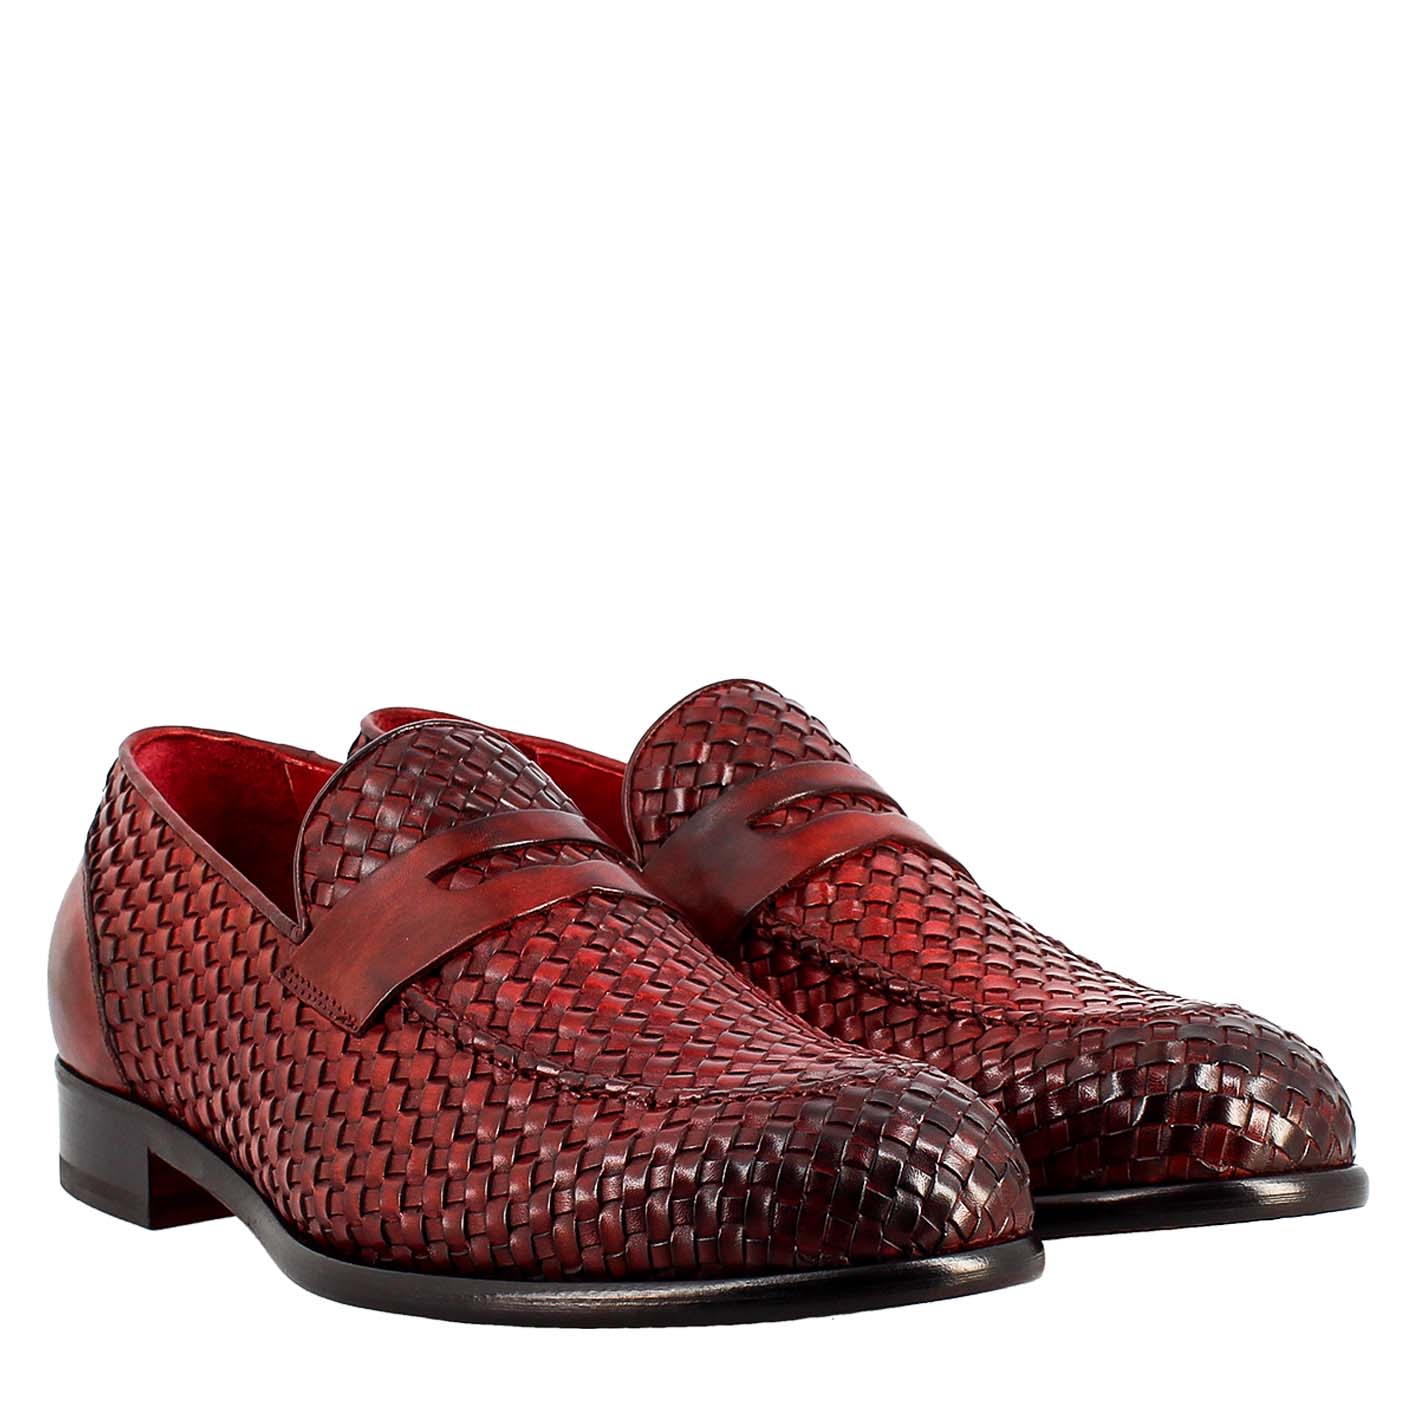 Red moccasin woven full grain leather